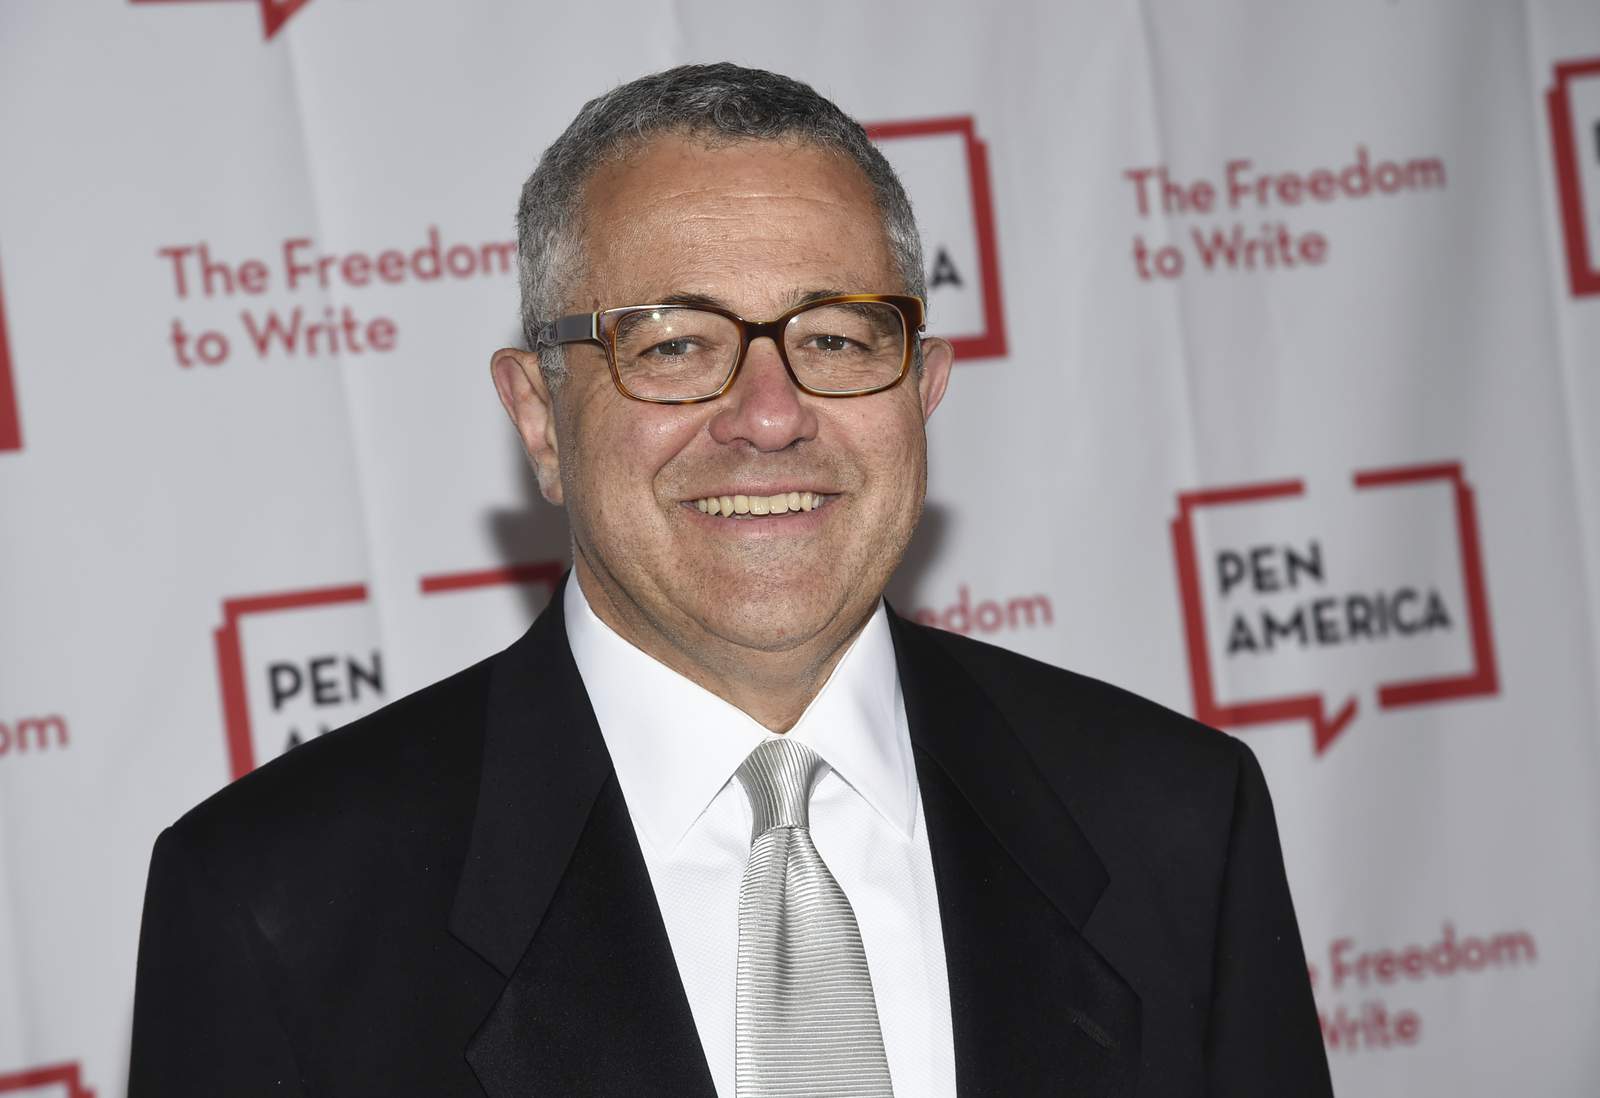 Toobin suspended by the New Yorker for 'personal' reasons